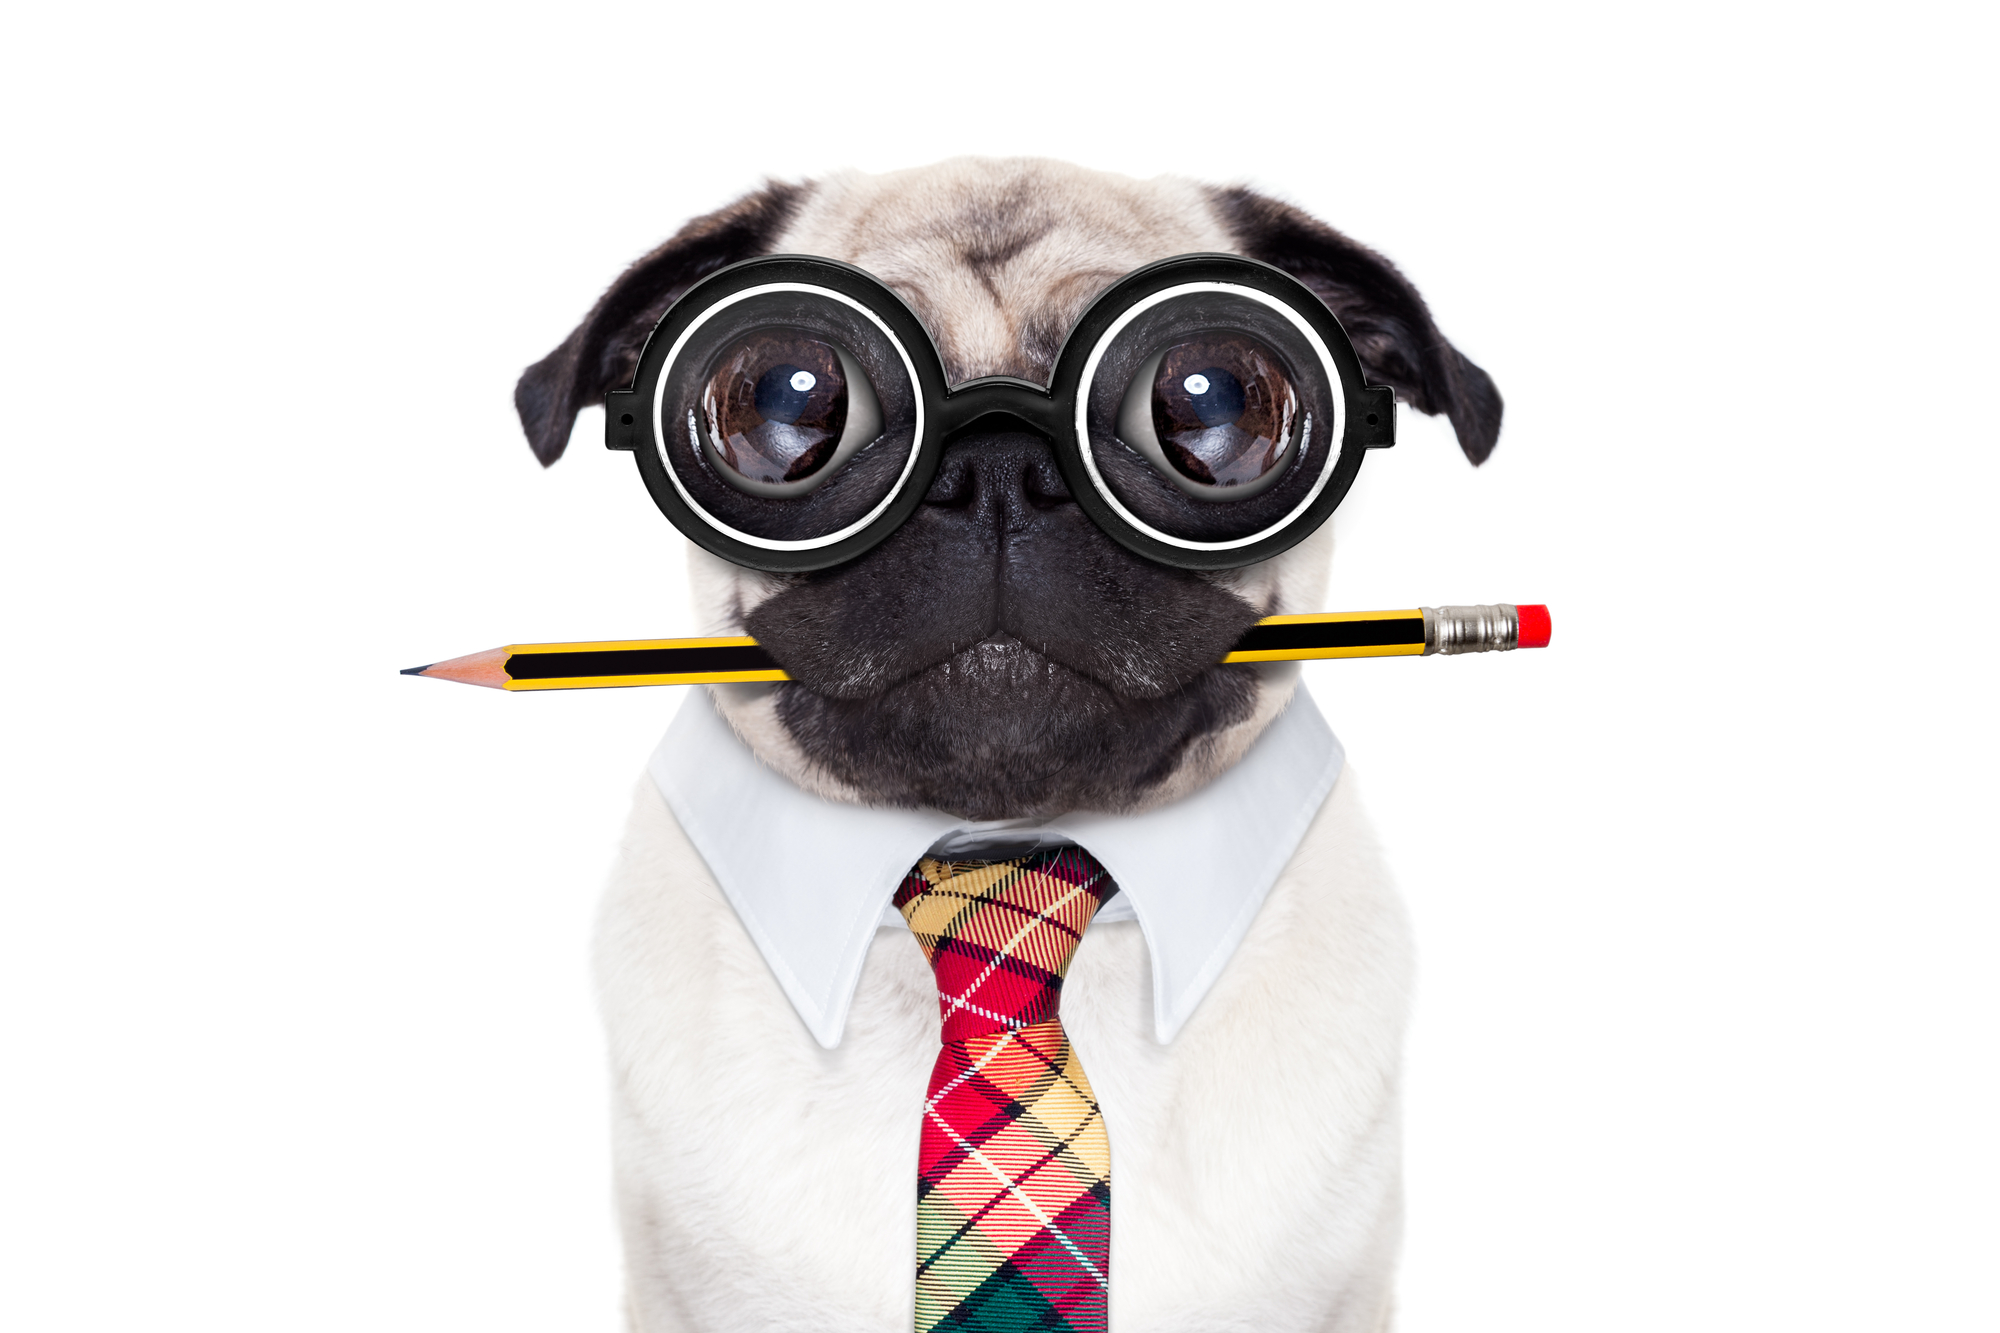 Silly looking pug dog with nerd glasses as an office business worker with pencil in mouth